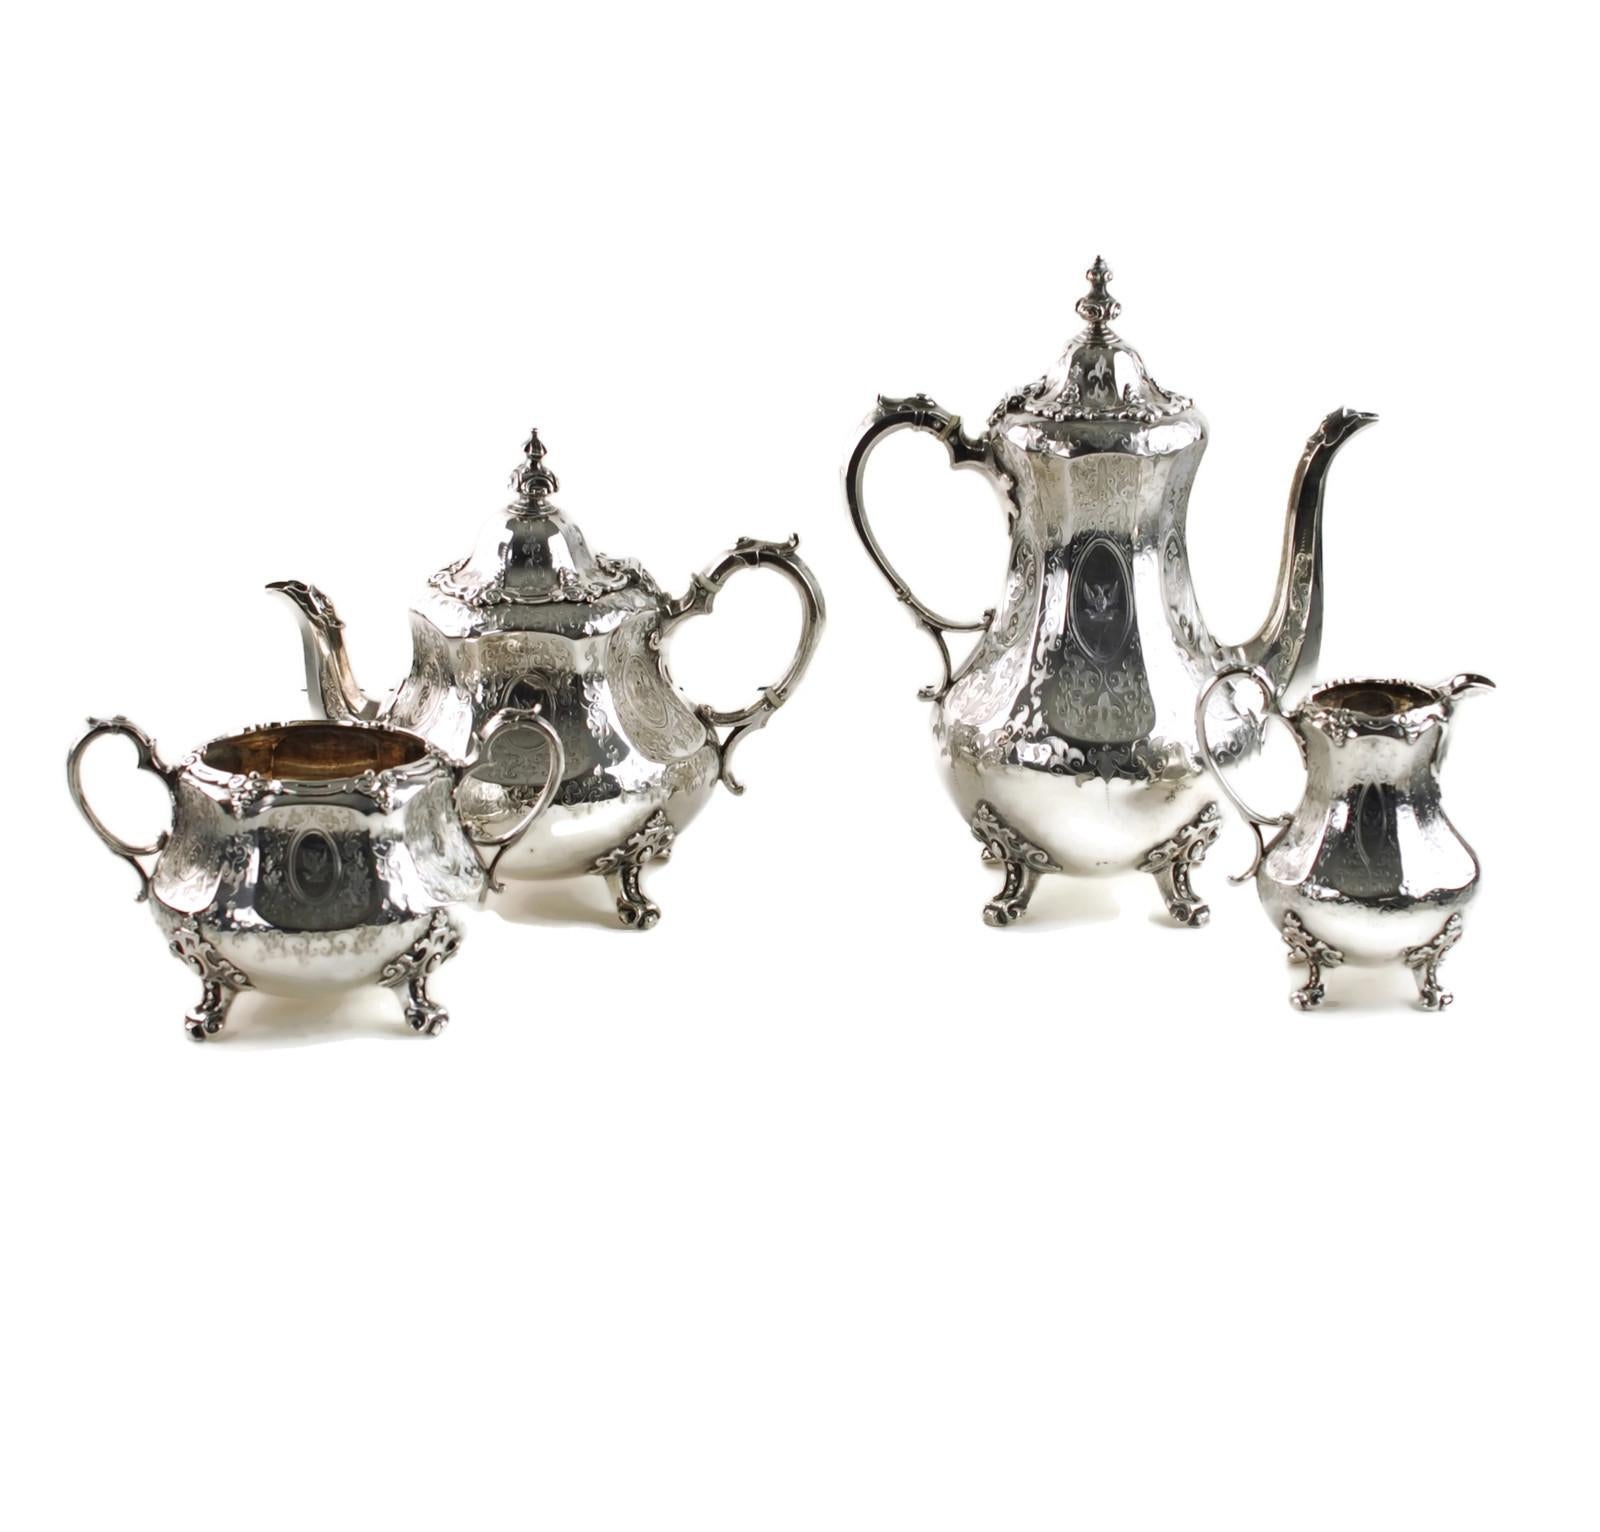 Victorian Antique Sterling Silver 4-Piece Engraved Tea & Coffee Set Daniel & Charles Houle